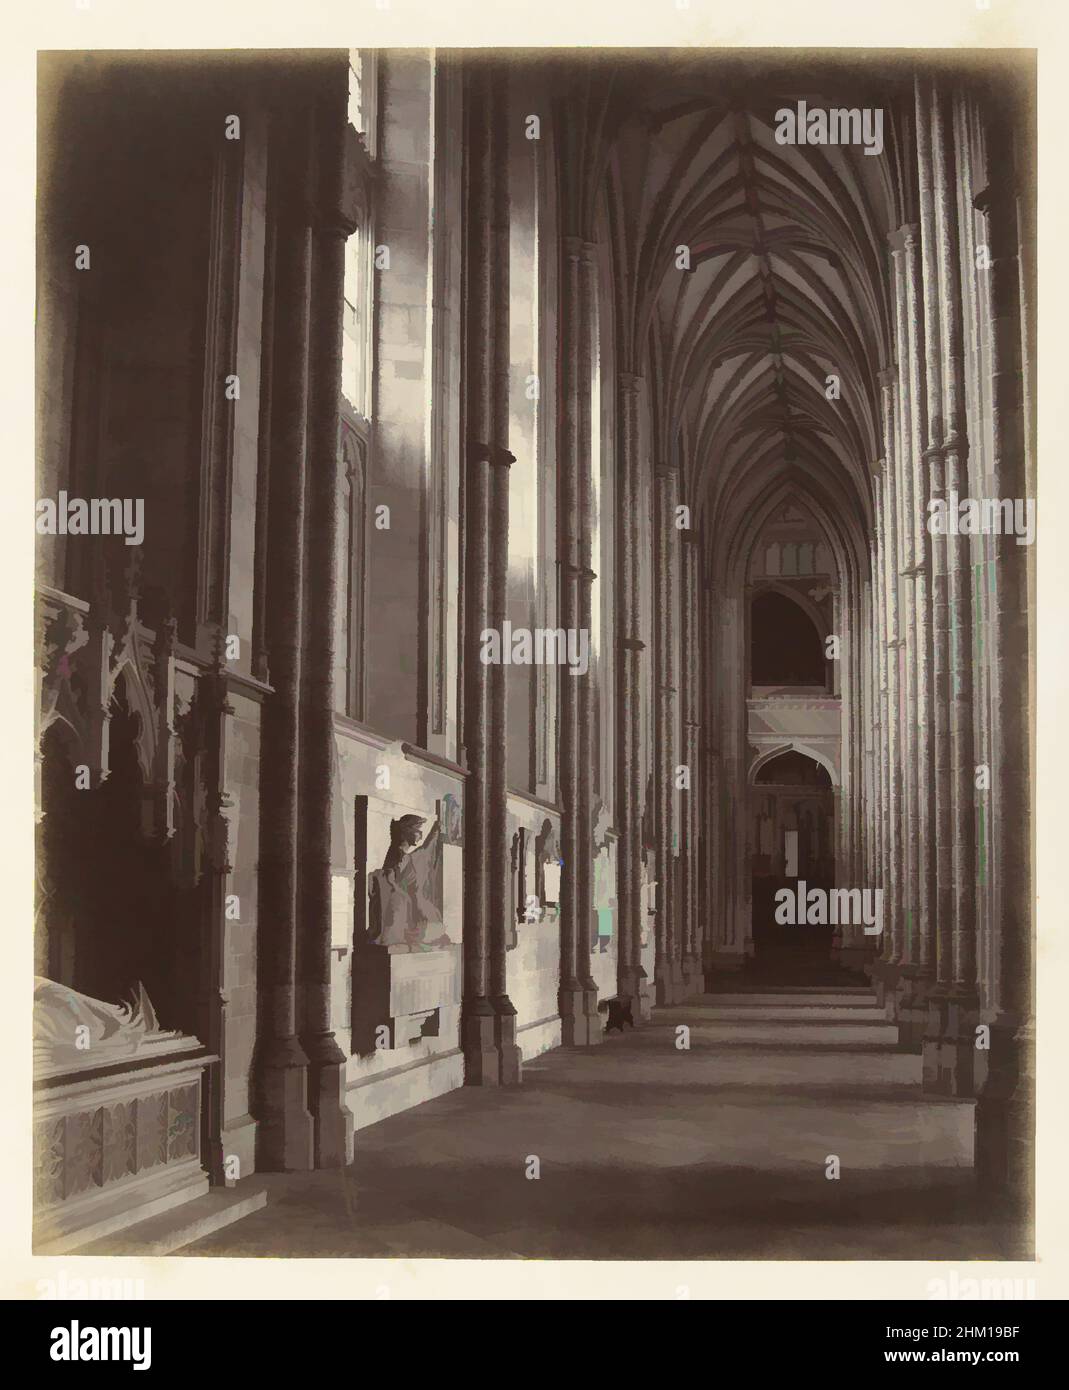 Art inspired by View into side aisle of Canterbury Cathedral, Henry George Austin (attributed to), Canterbury, 1860, paper, cardboard, albumen print, height 284 mm × width 237 mmheight 394 mm × width 333 mm, Classic works modernized by Artotop with a splash of modernity. Shapes, color and value, eye-catching visual impact on art. Emotions through freedom of artworks in a contemporary way. A timeless message pursuing a wildly creative new direction. Artists turning to the digital medium and creating the Artotop NFT Stock Photo